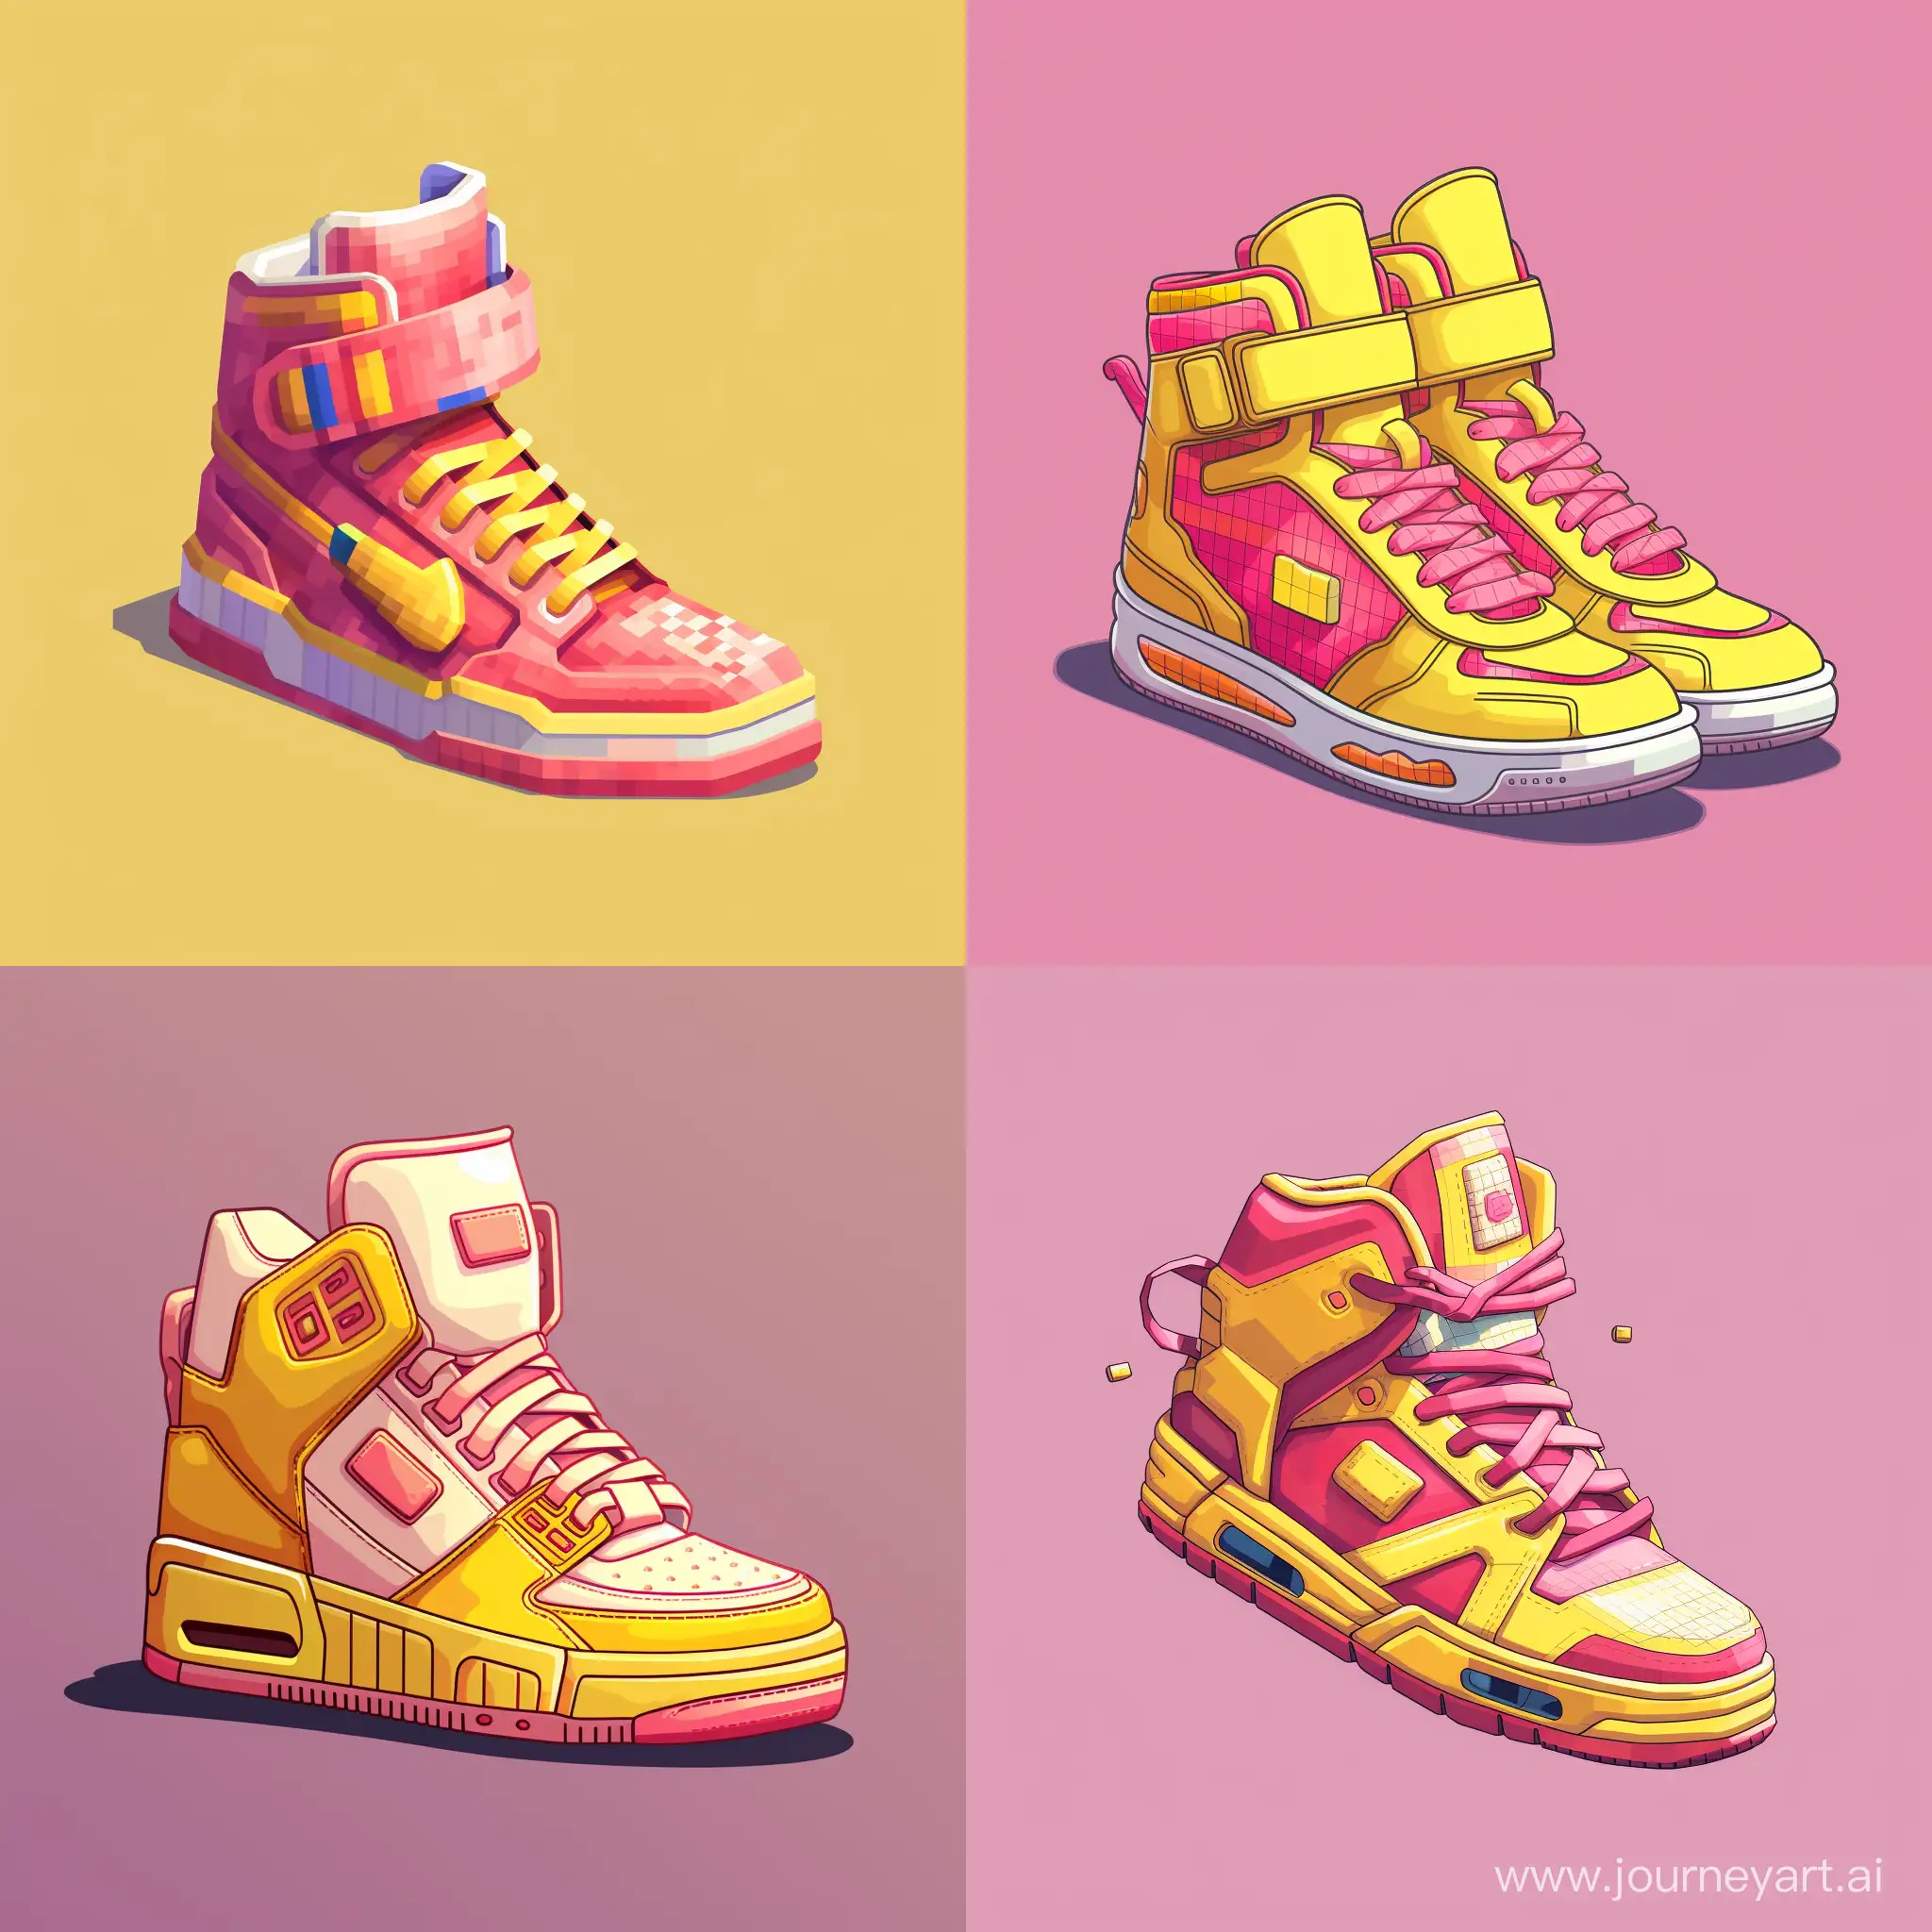 Pixel-Art-Sneakers-in-Vibrant-Pink-and-Yellow-Colors